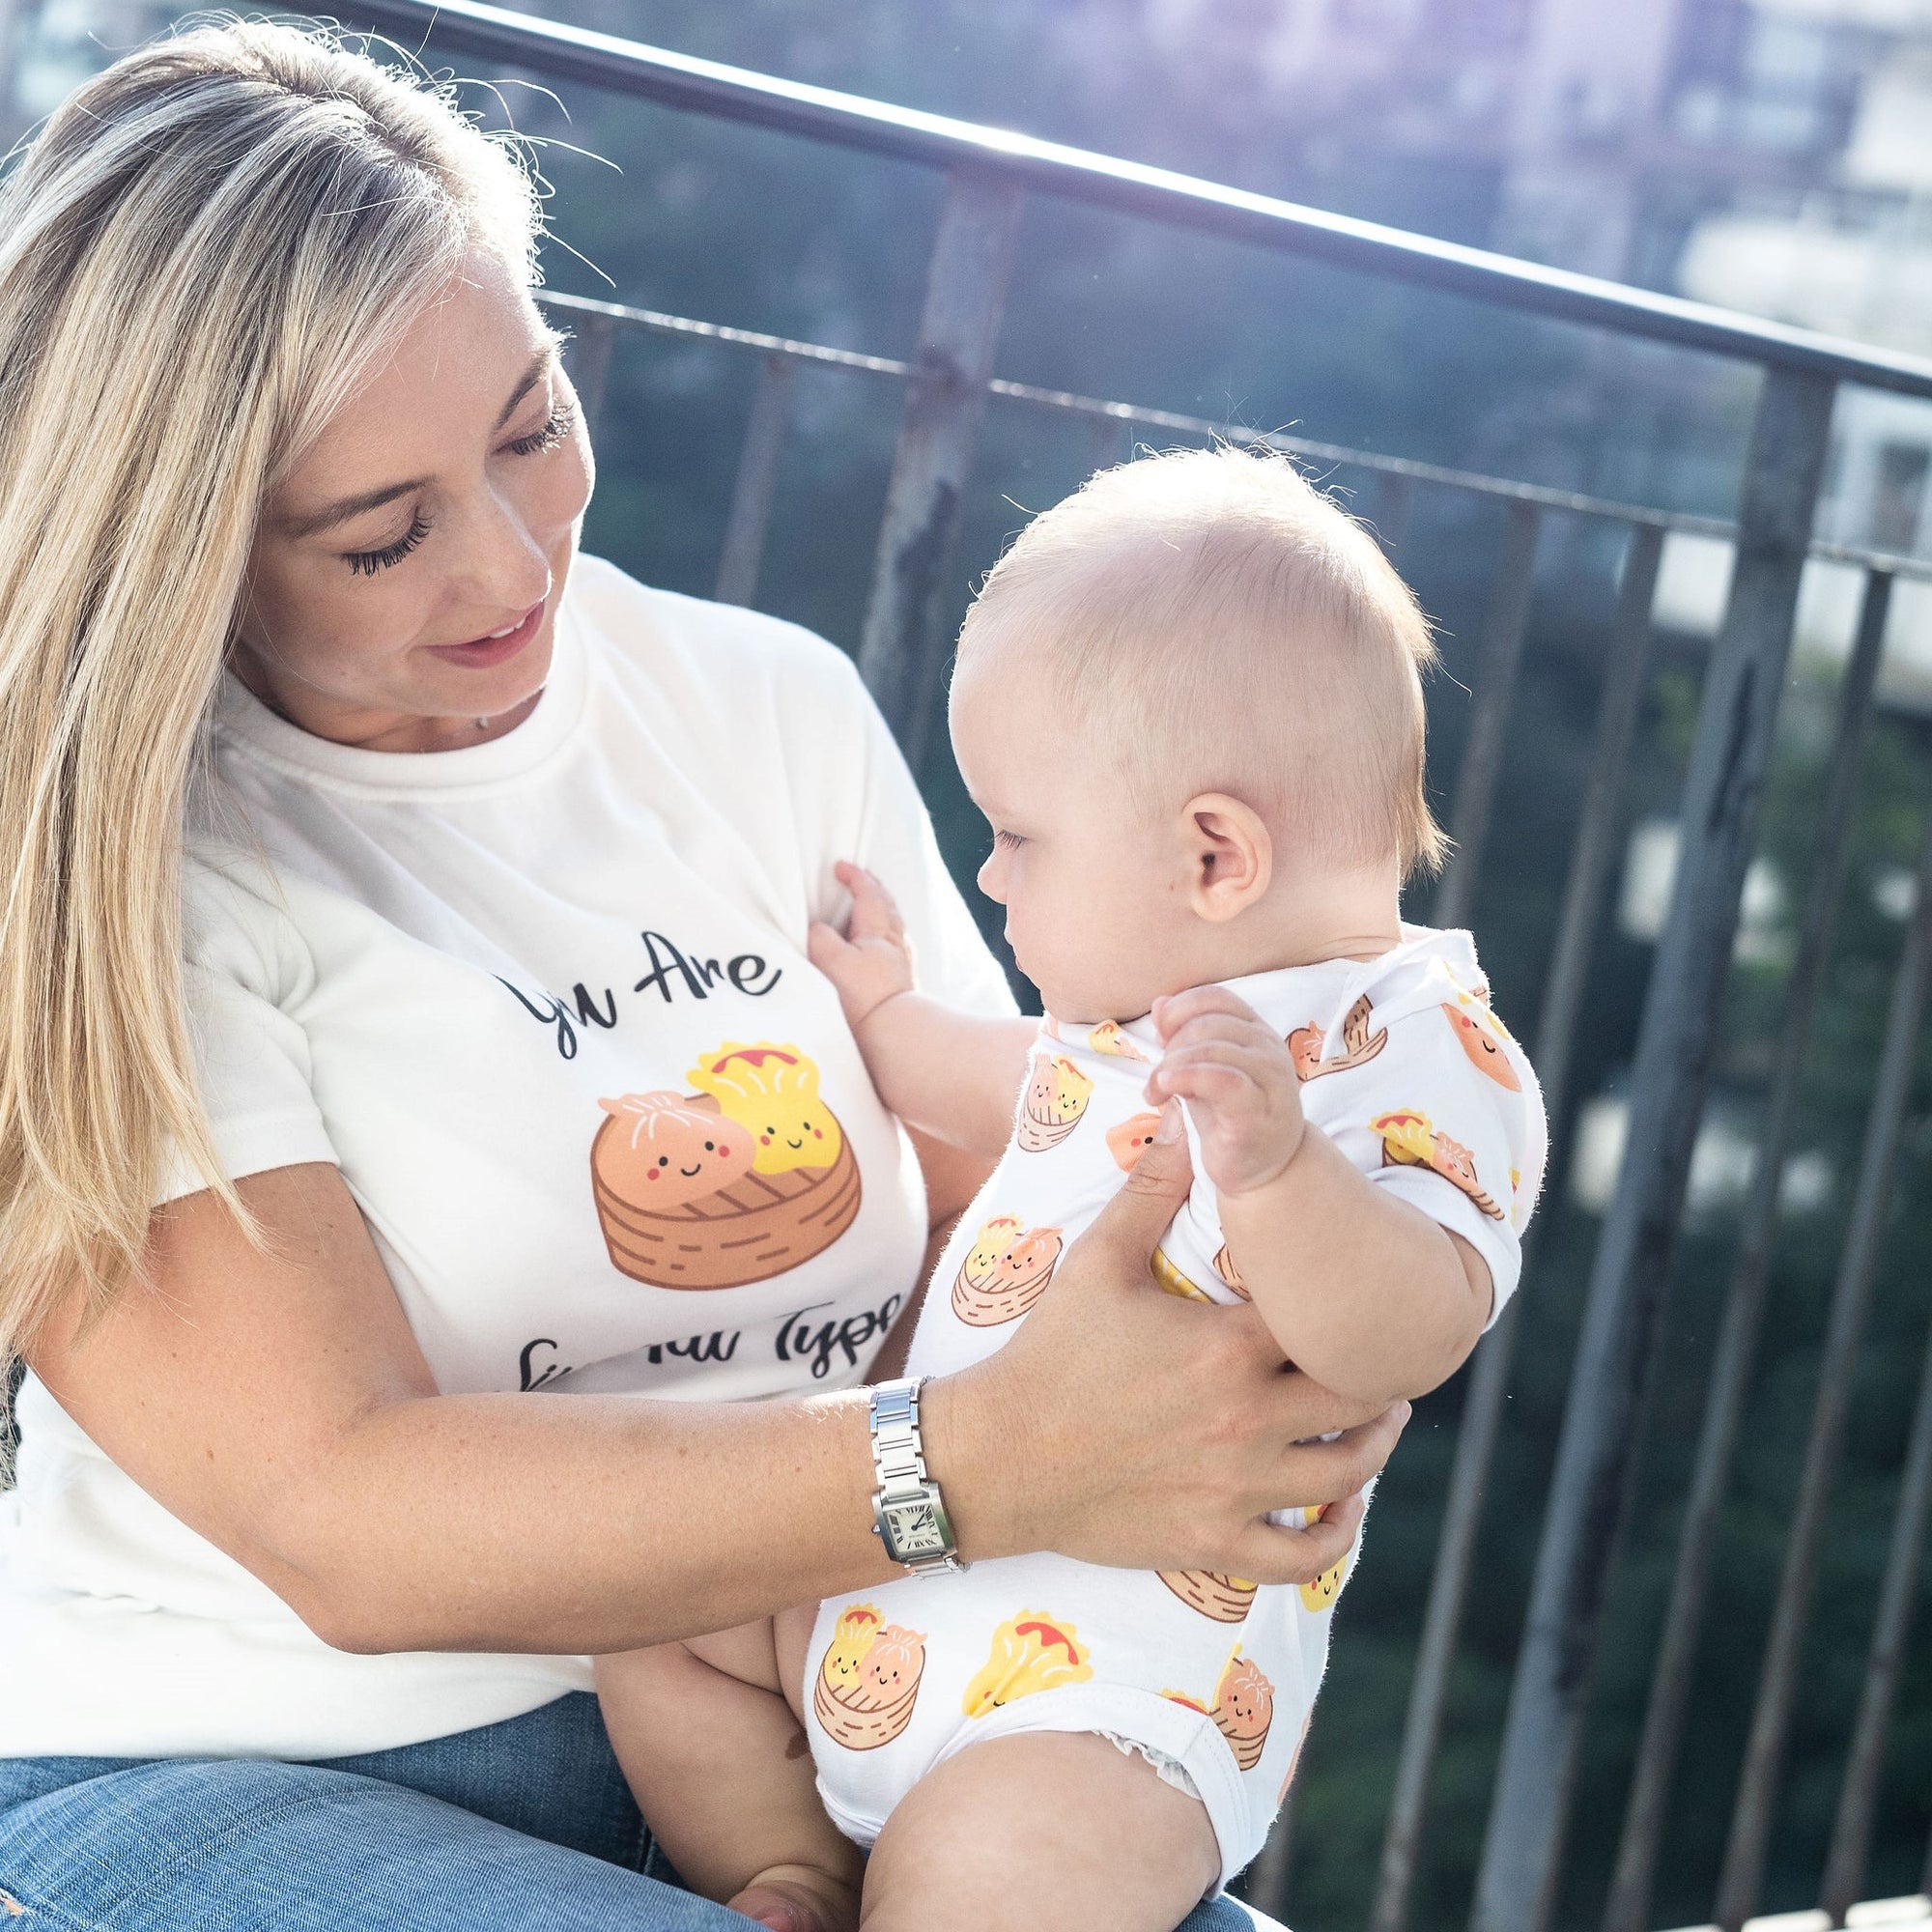 the wee bean organic cotton t-shirt tee adult womens teen mommy and me matching and baby onesie in dim sum little dumpling